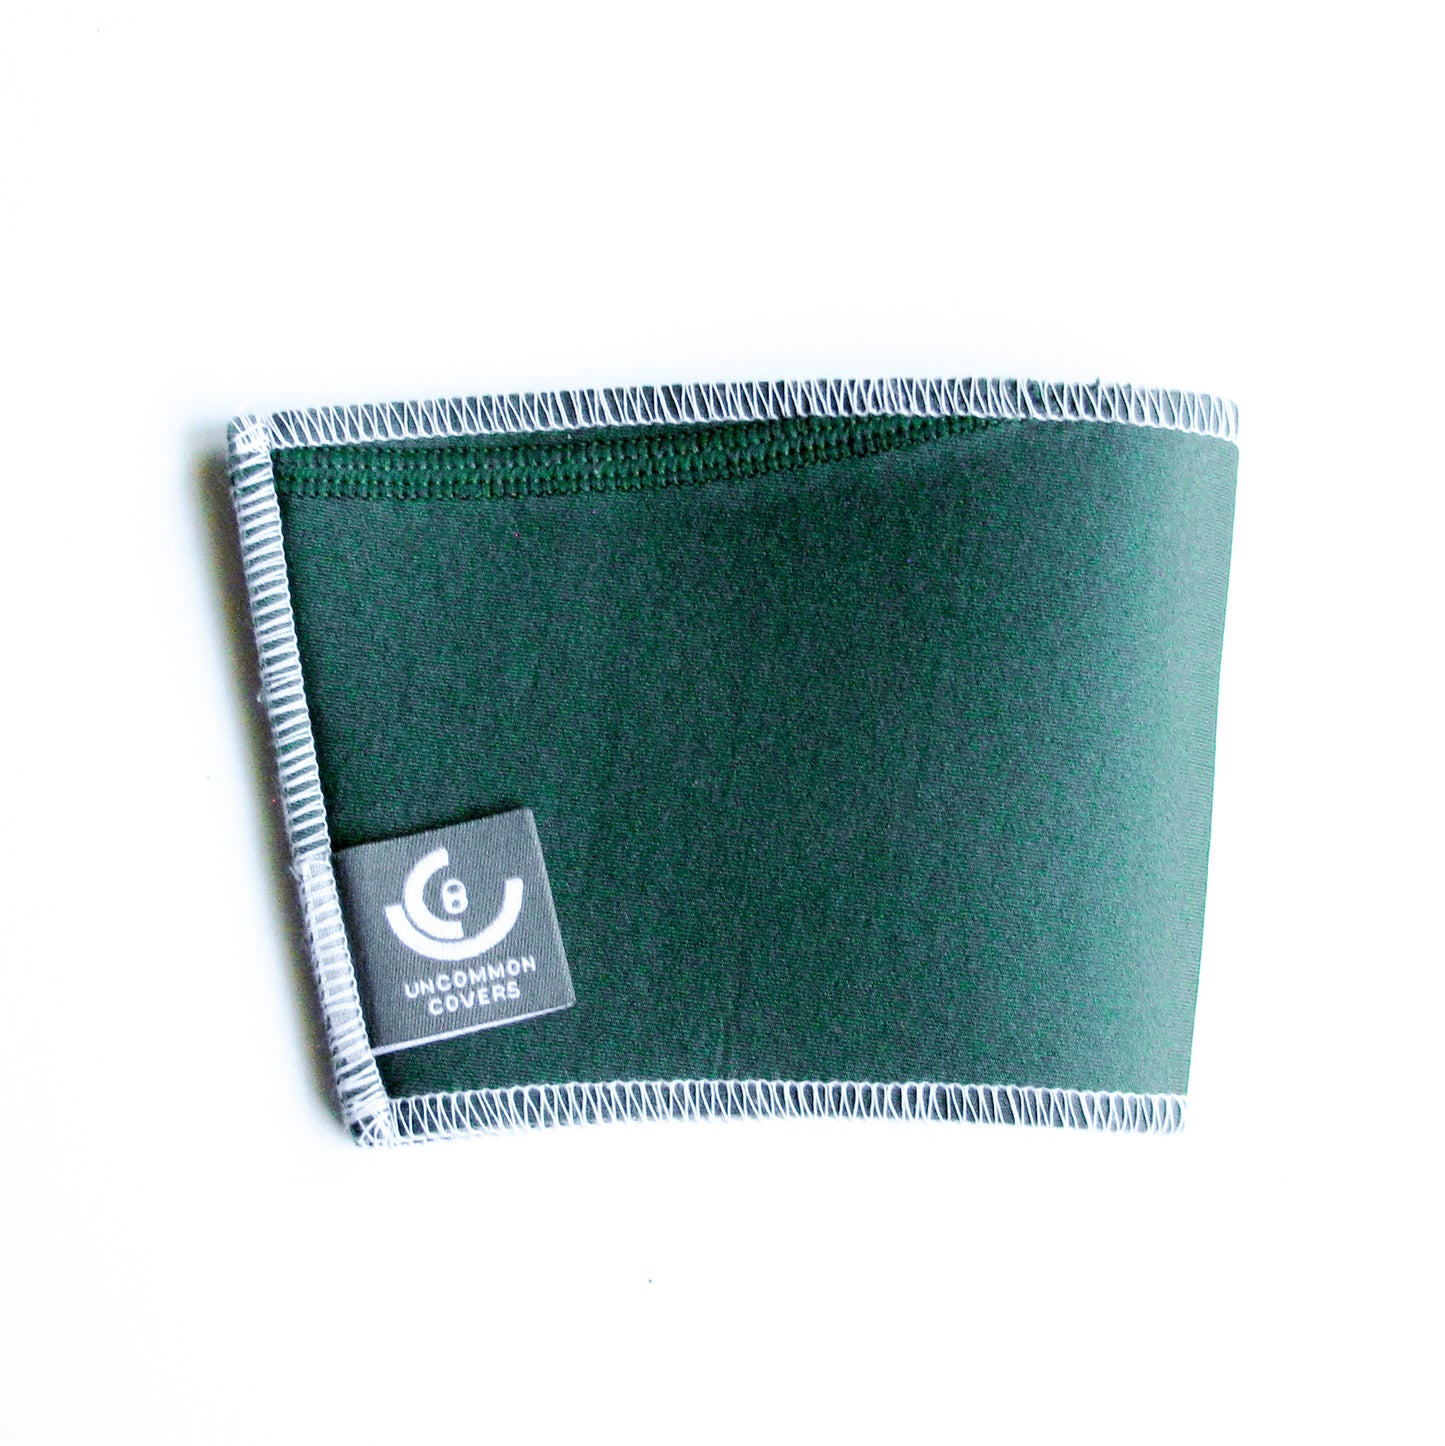 Green athletic cup sleeve